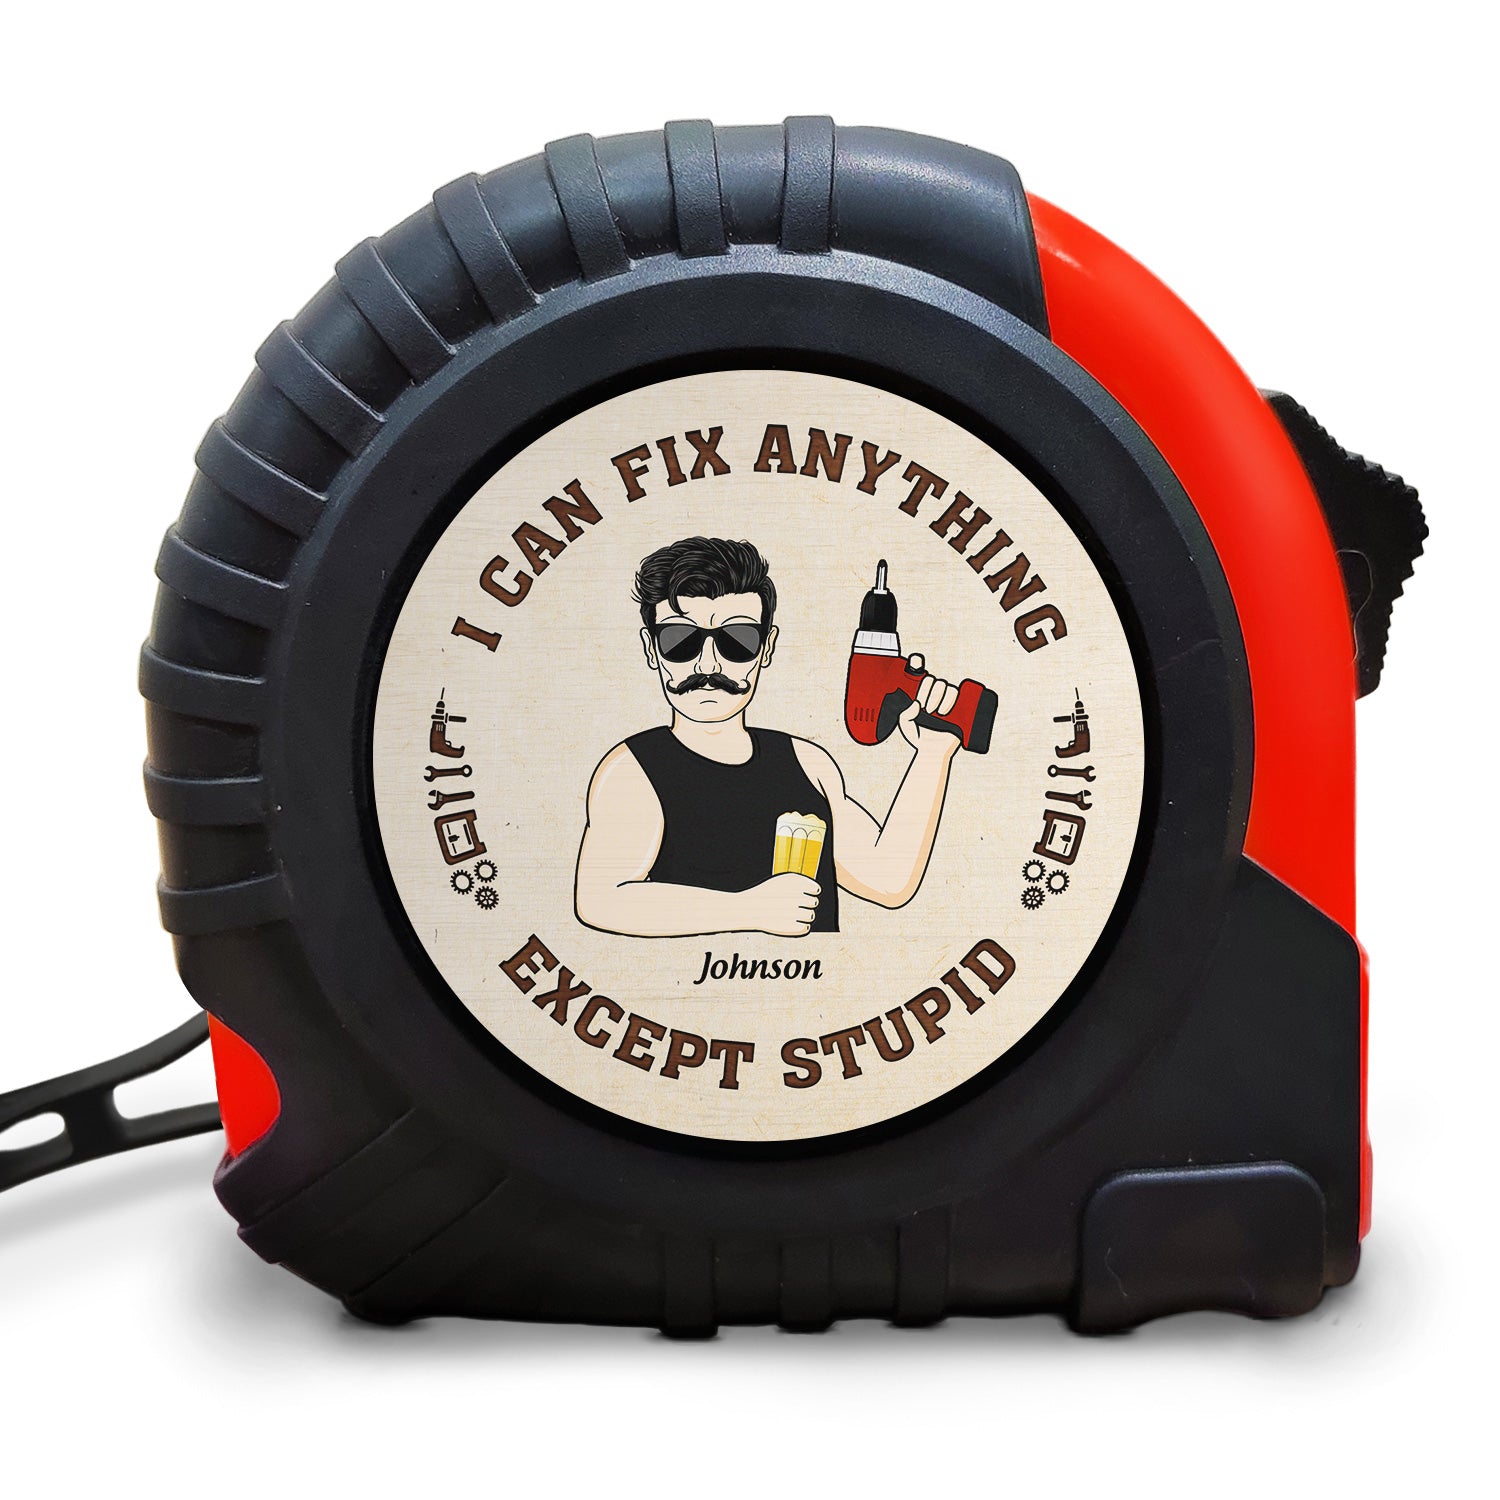 I Can Fix Anything Except Stupid - Gift For Men, Dad, Father, Grandfather, Grandpa, Husband - Personalized Tape Measure